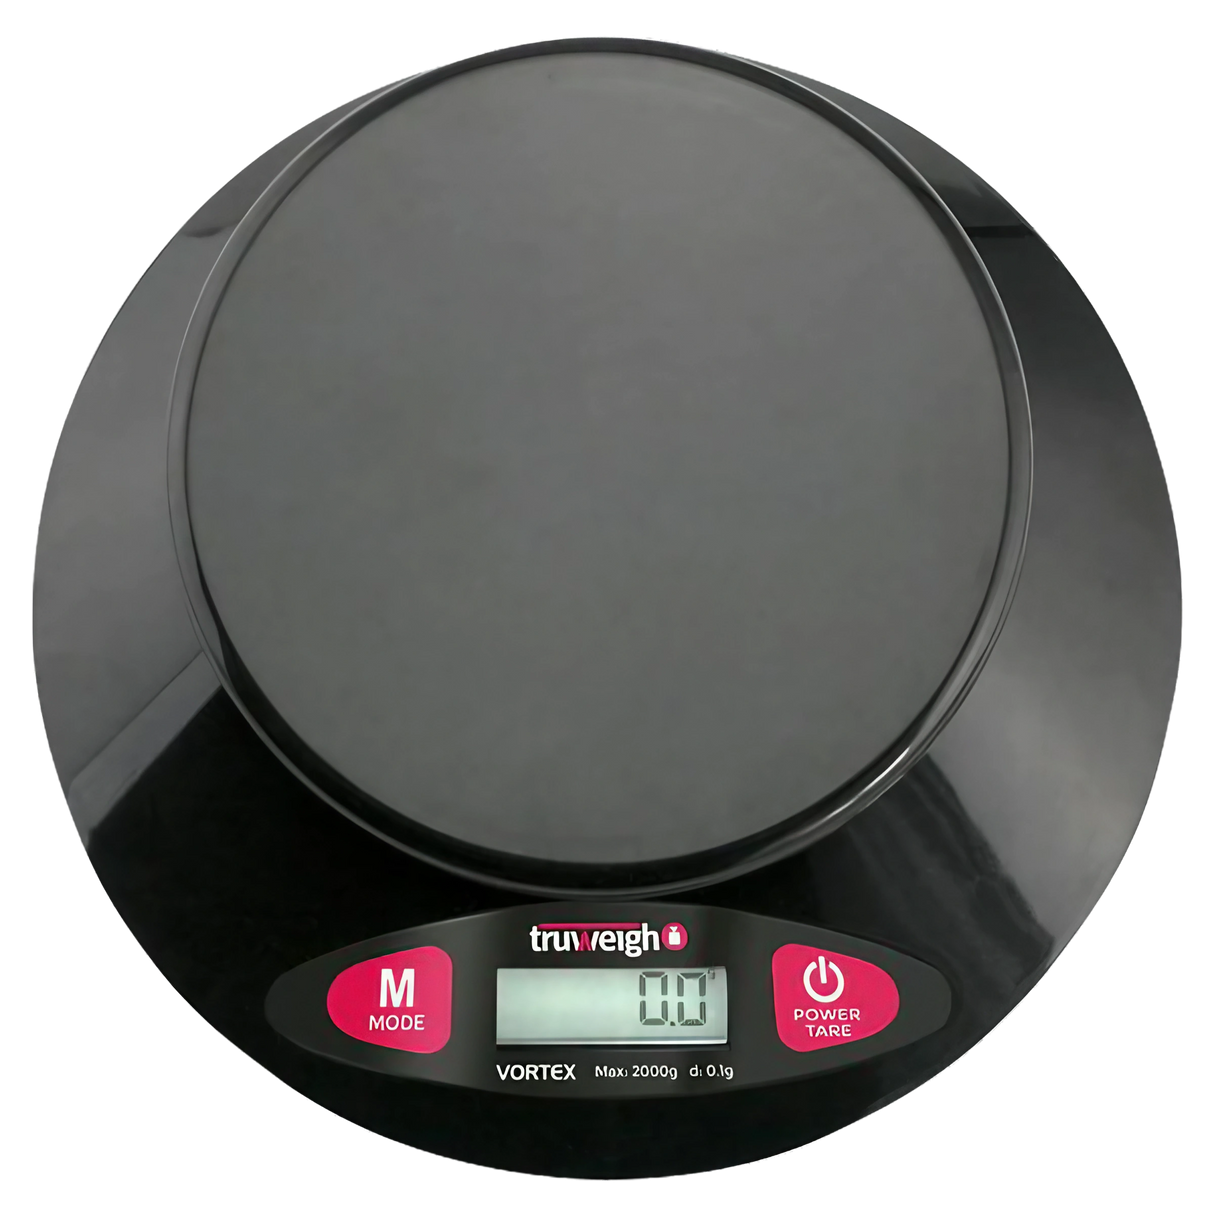 Truweigh Vortex Digital Bowl Scale in black, compact design, top view showing LCD